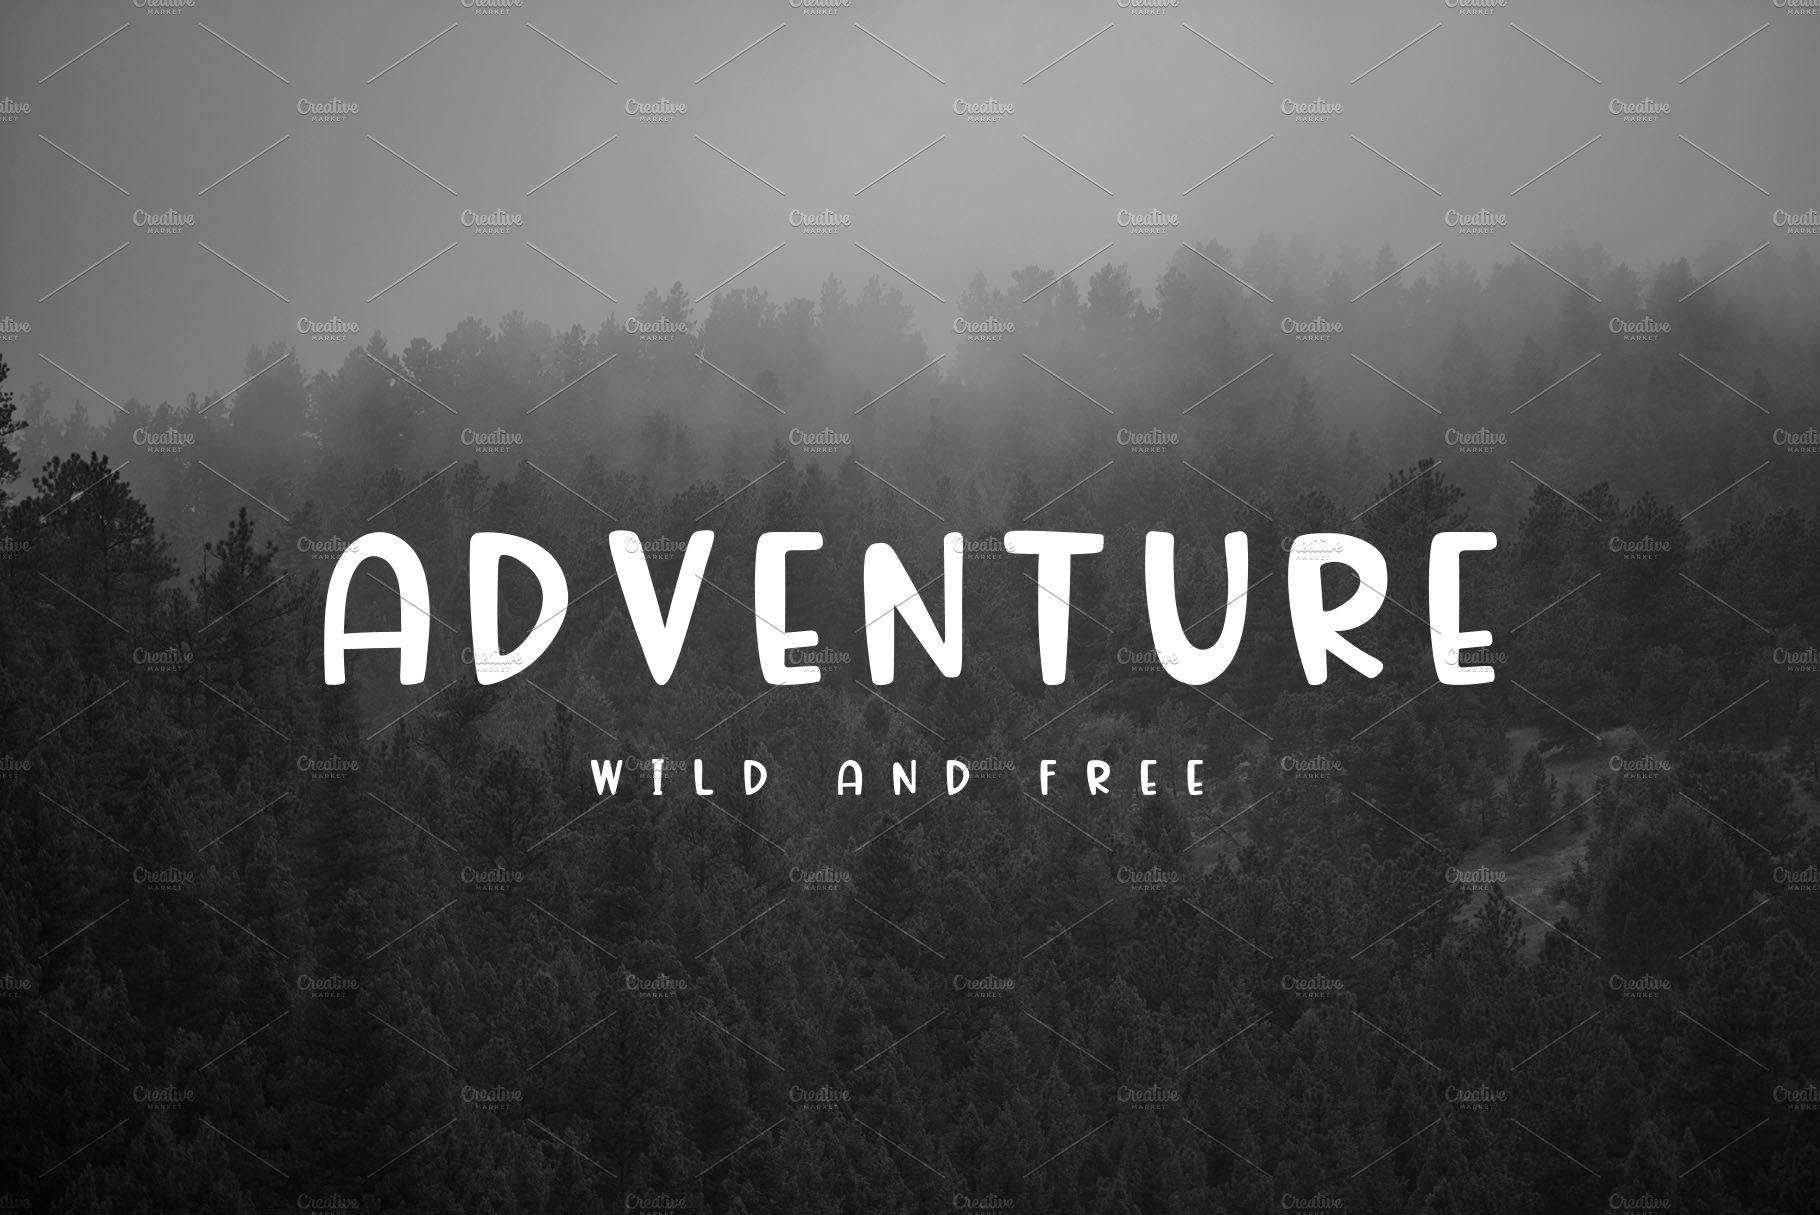 Adventure Font and Camping Pack cover image.